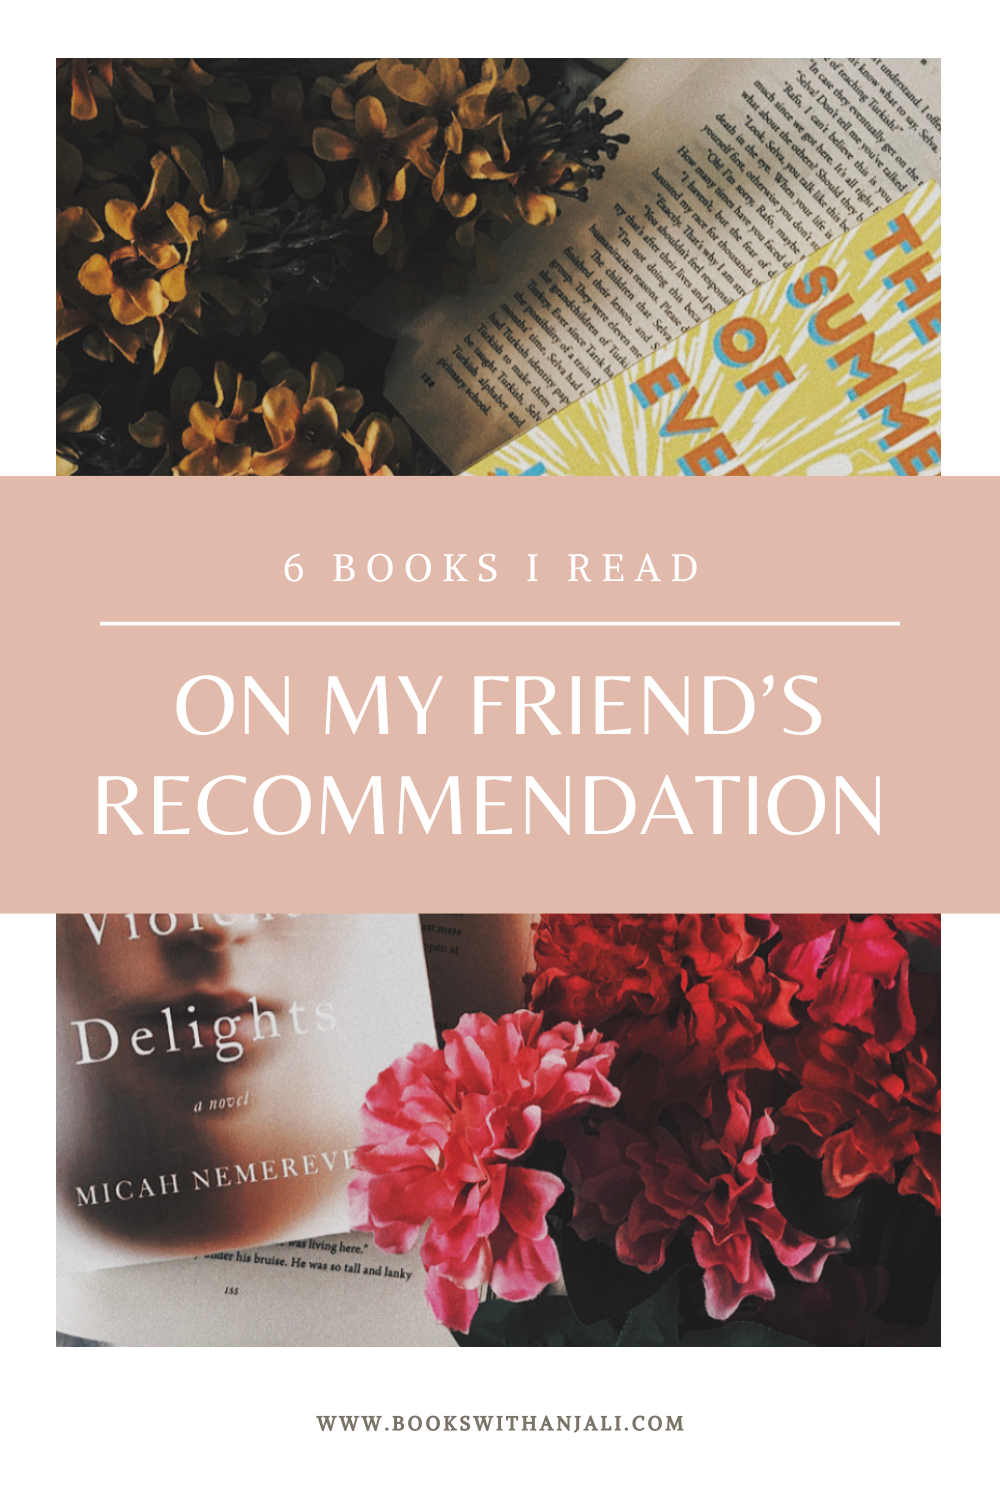 6 books I read on my friend’s recommendation